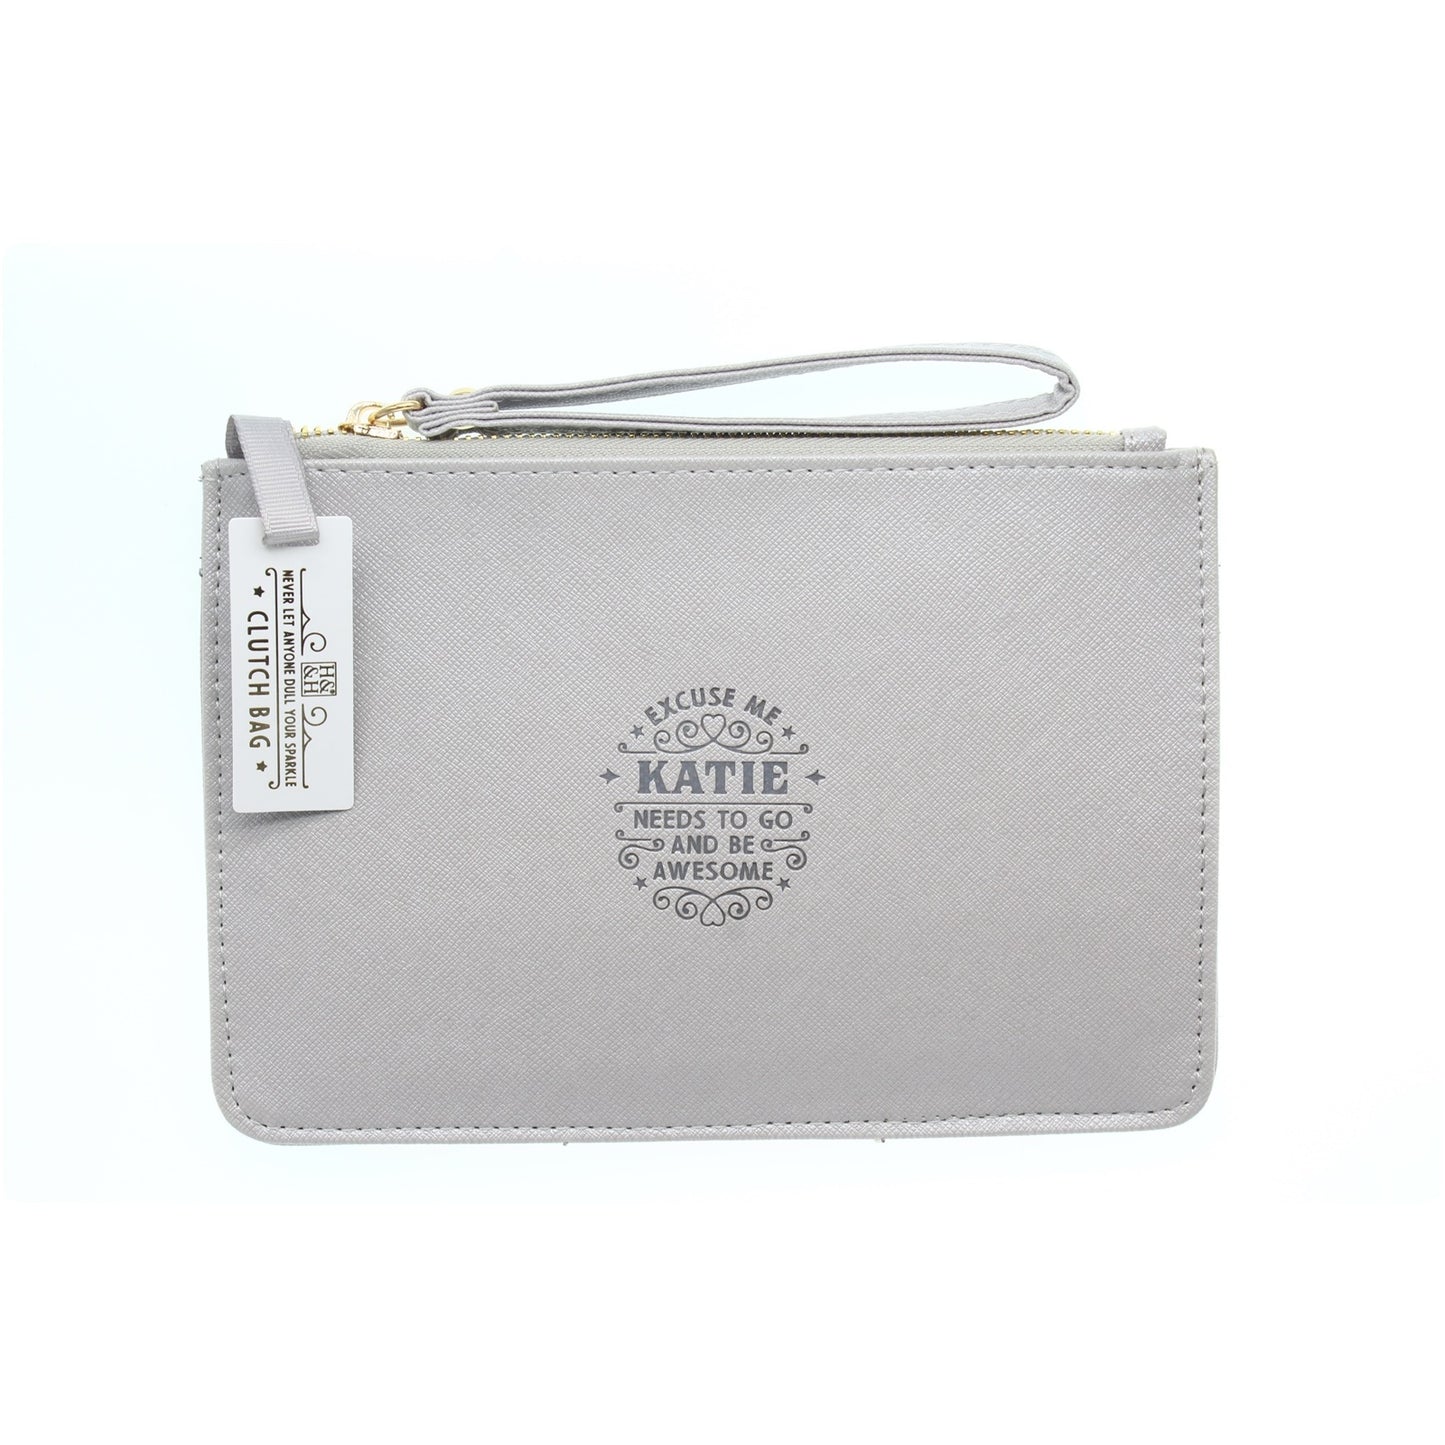 Clutch Bag With Handle & Embossed Text "Katie"